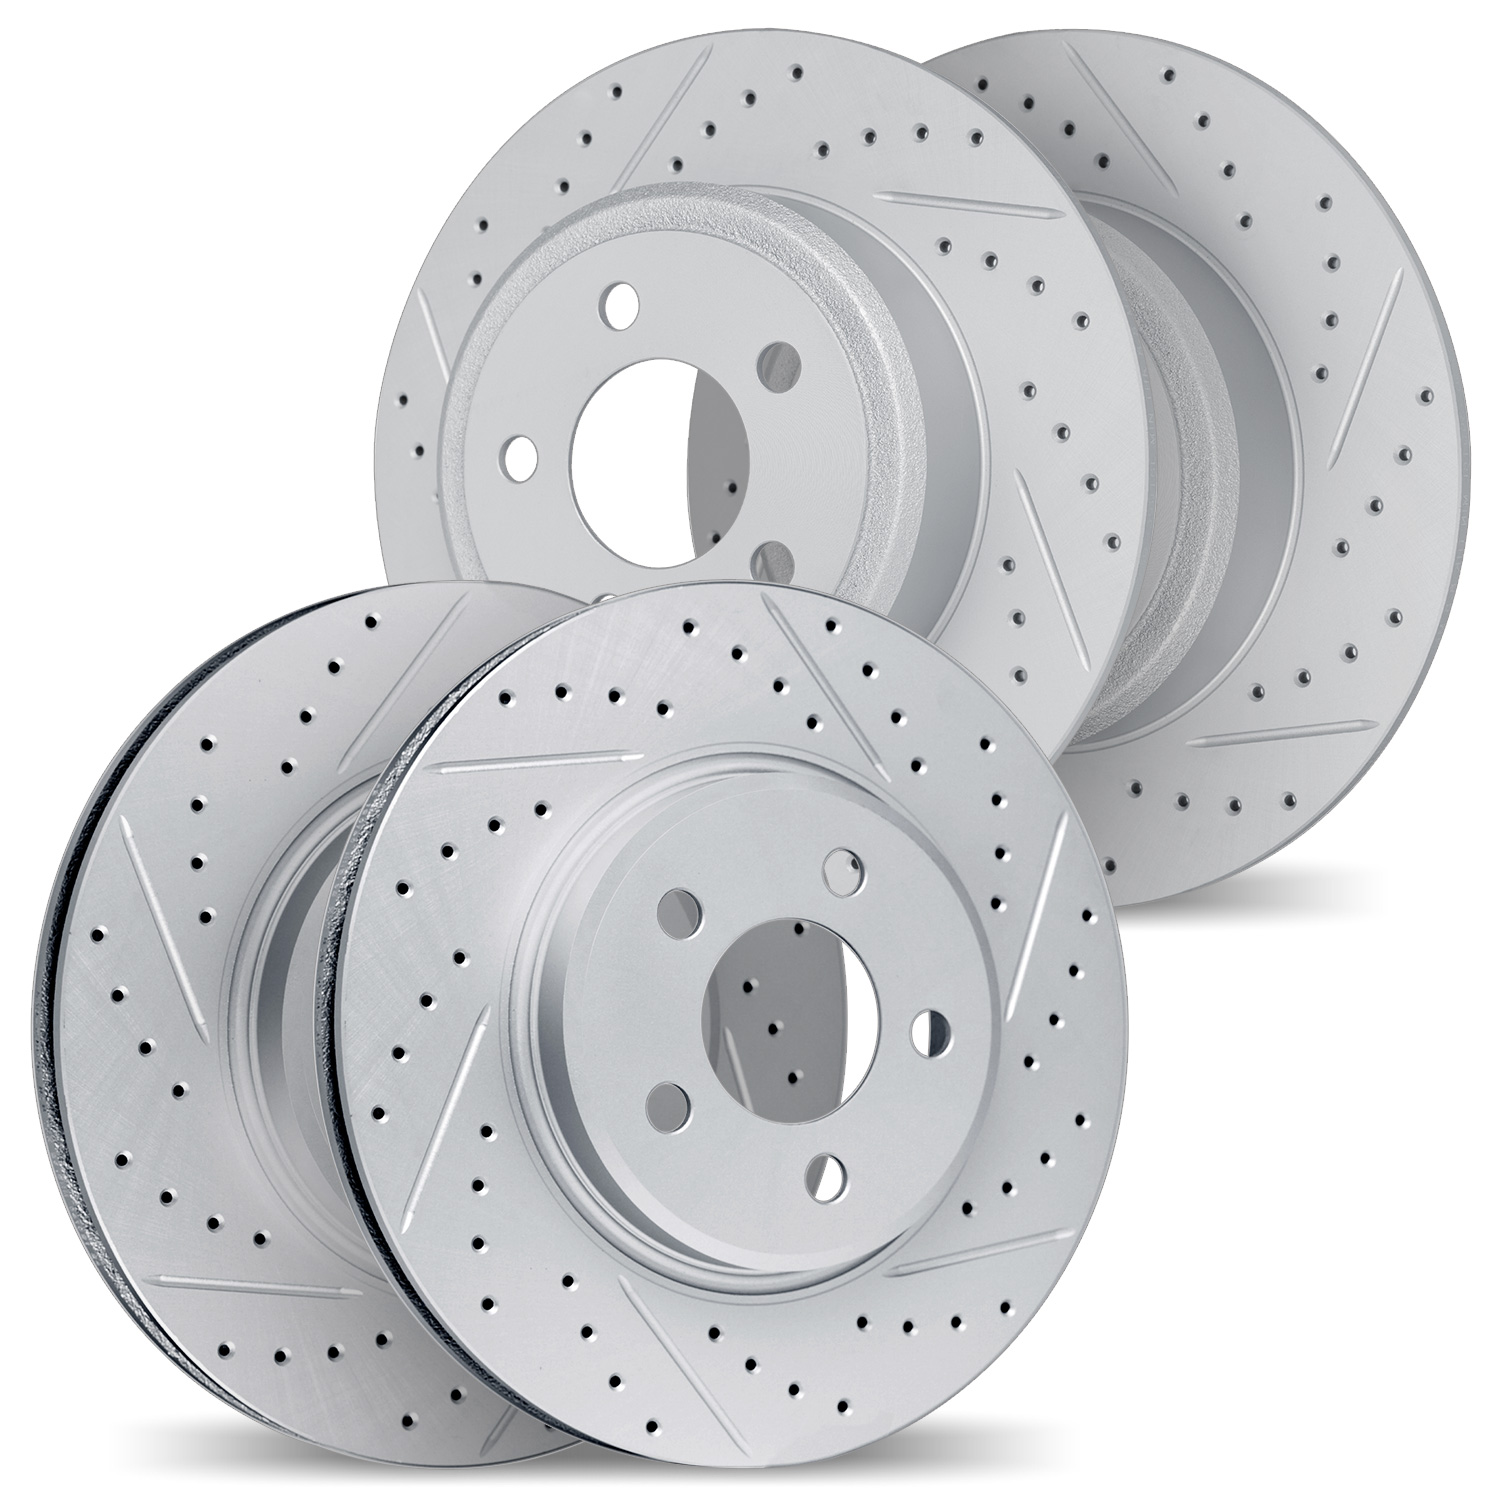 2004-80026 Geoperformance Drilled/Slotted Brake Rotors, Fits Select Ford/Lincoln/Mercury/Mazda, Position: Front and Rear